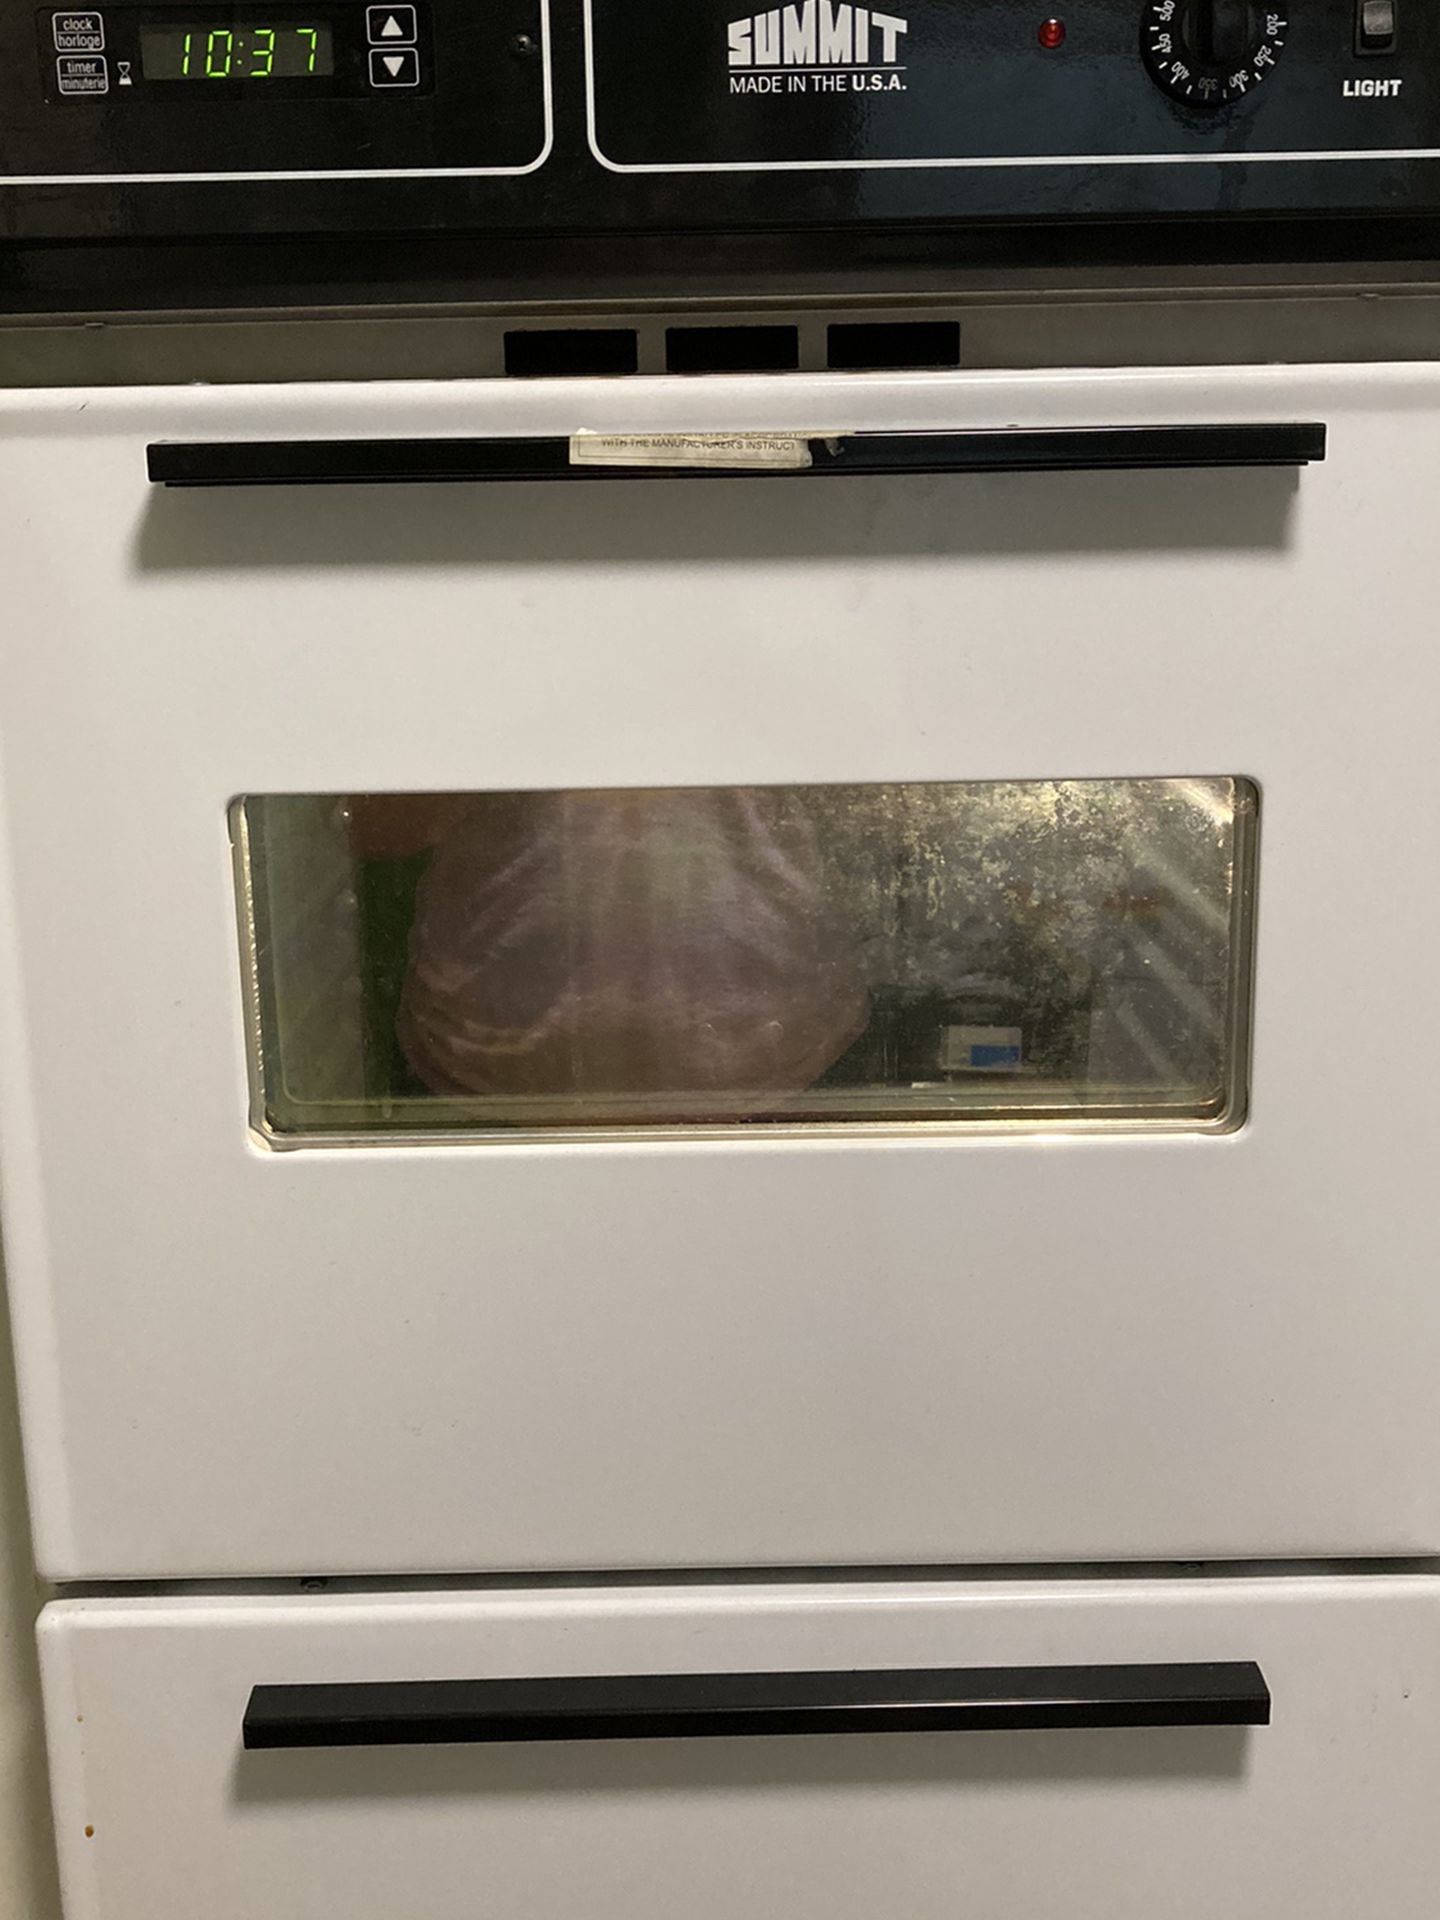 24” Summit Single Gas Wall Oven - White